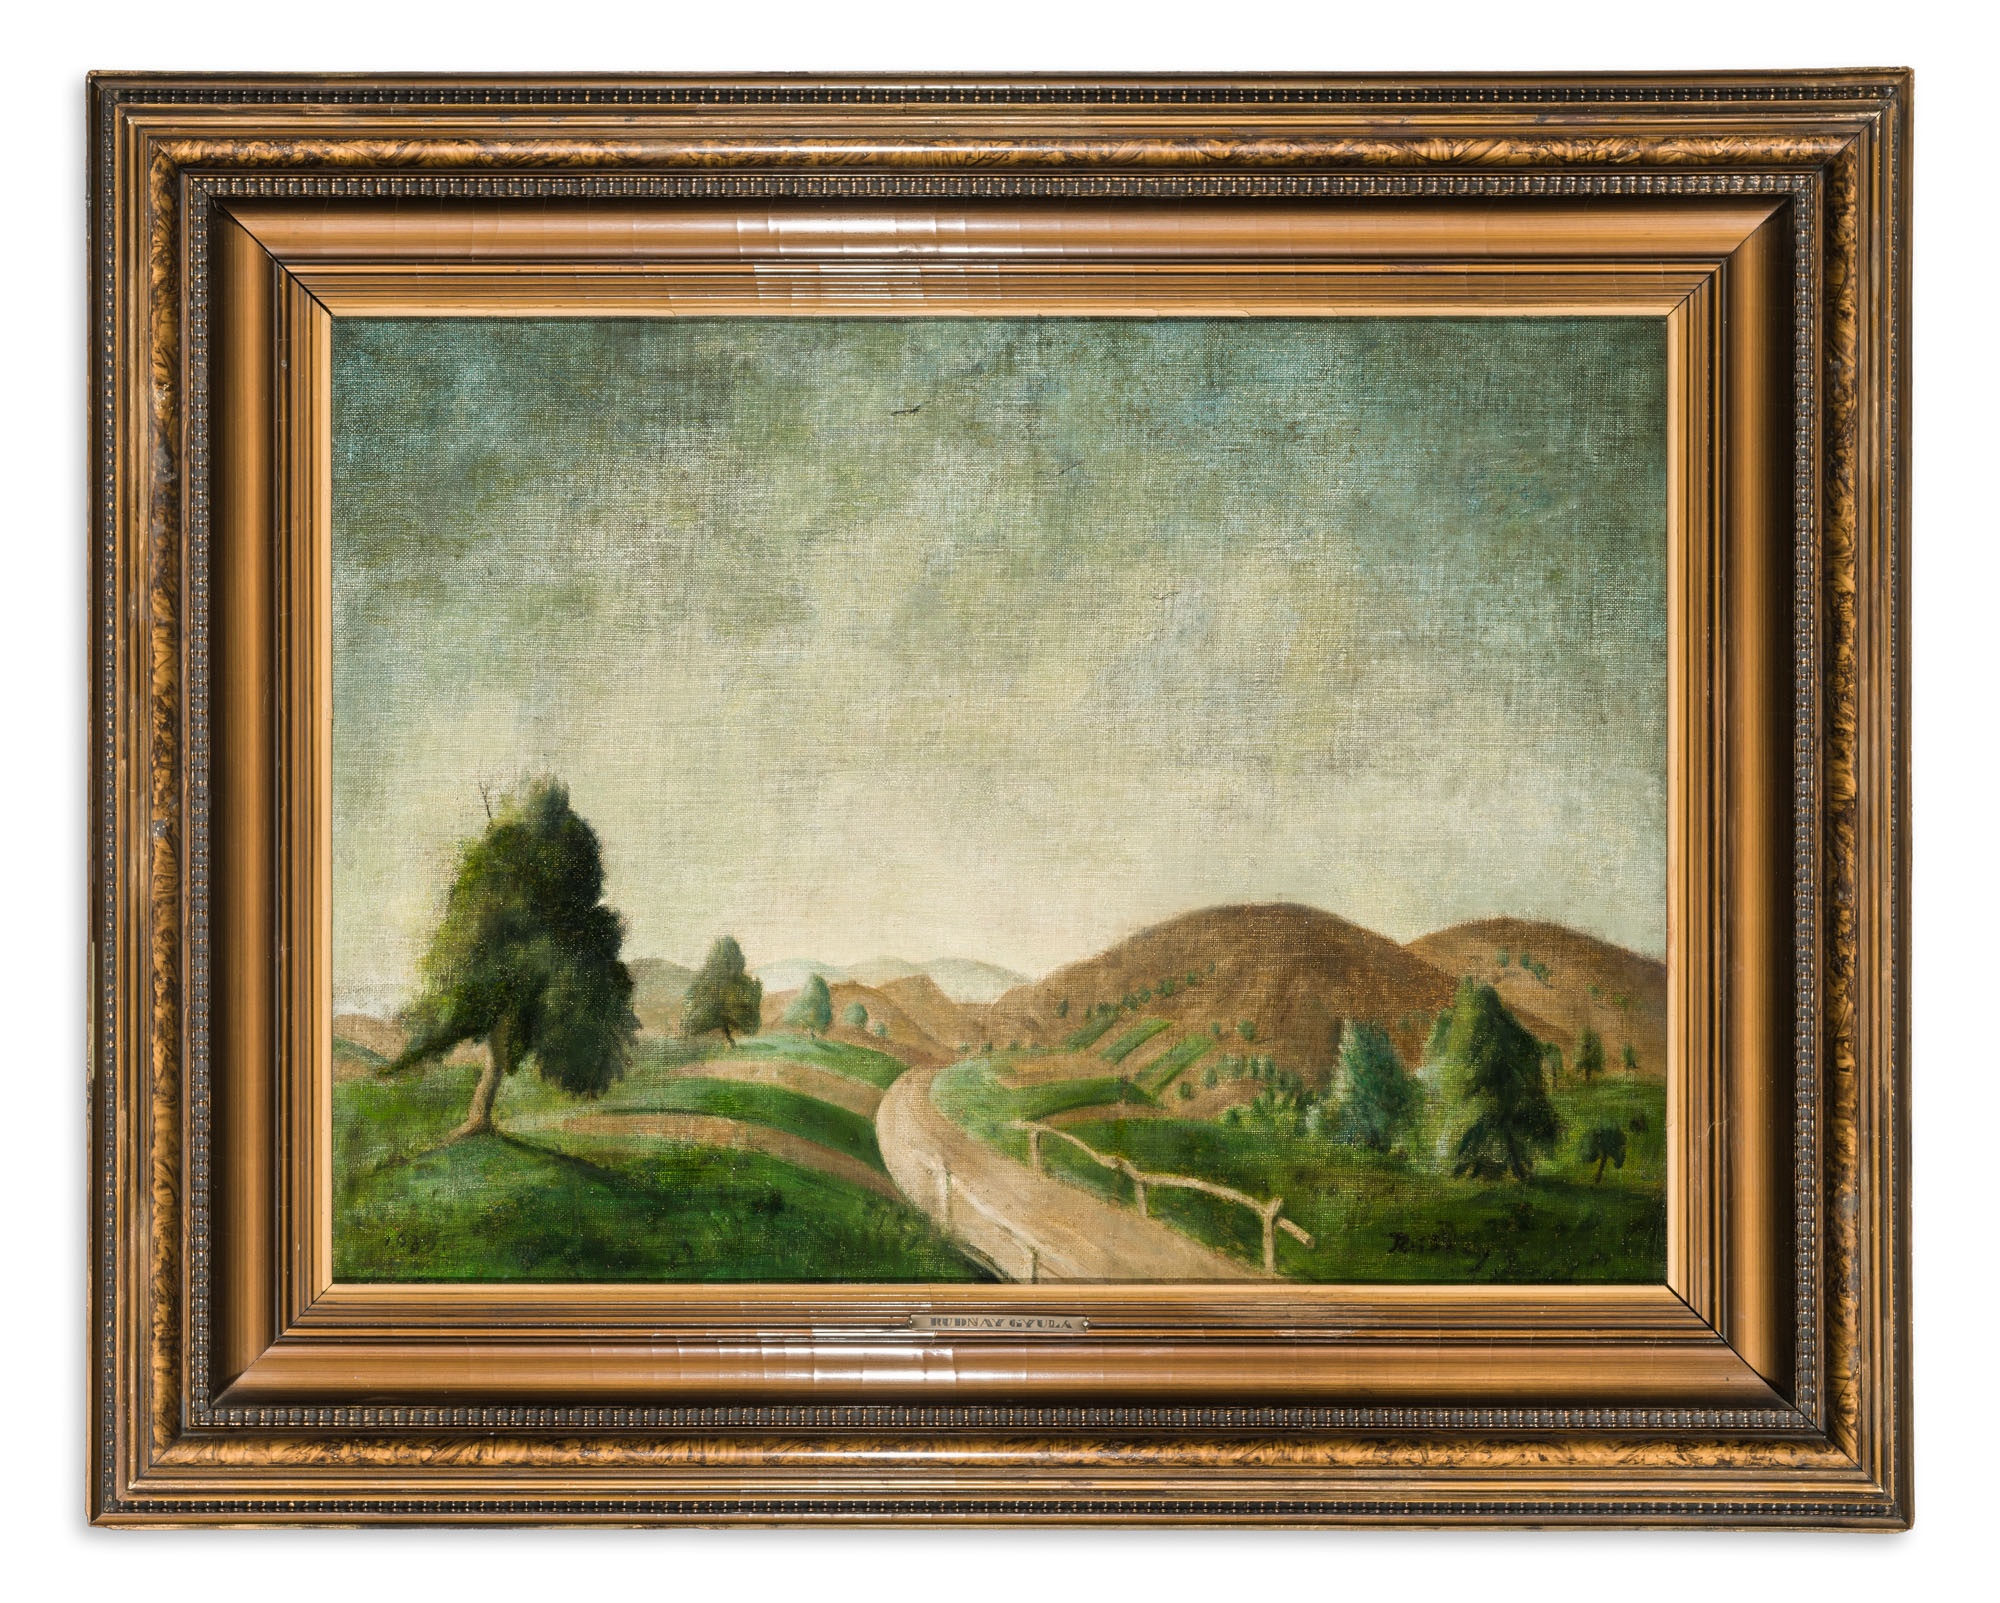 Gyula Rudnay: untitled (known as “Road into the Hills”) (The Salgo Trust for Education CC BY-NC-SA)